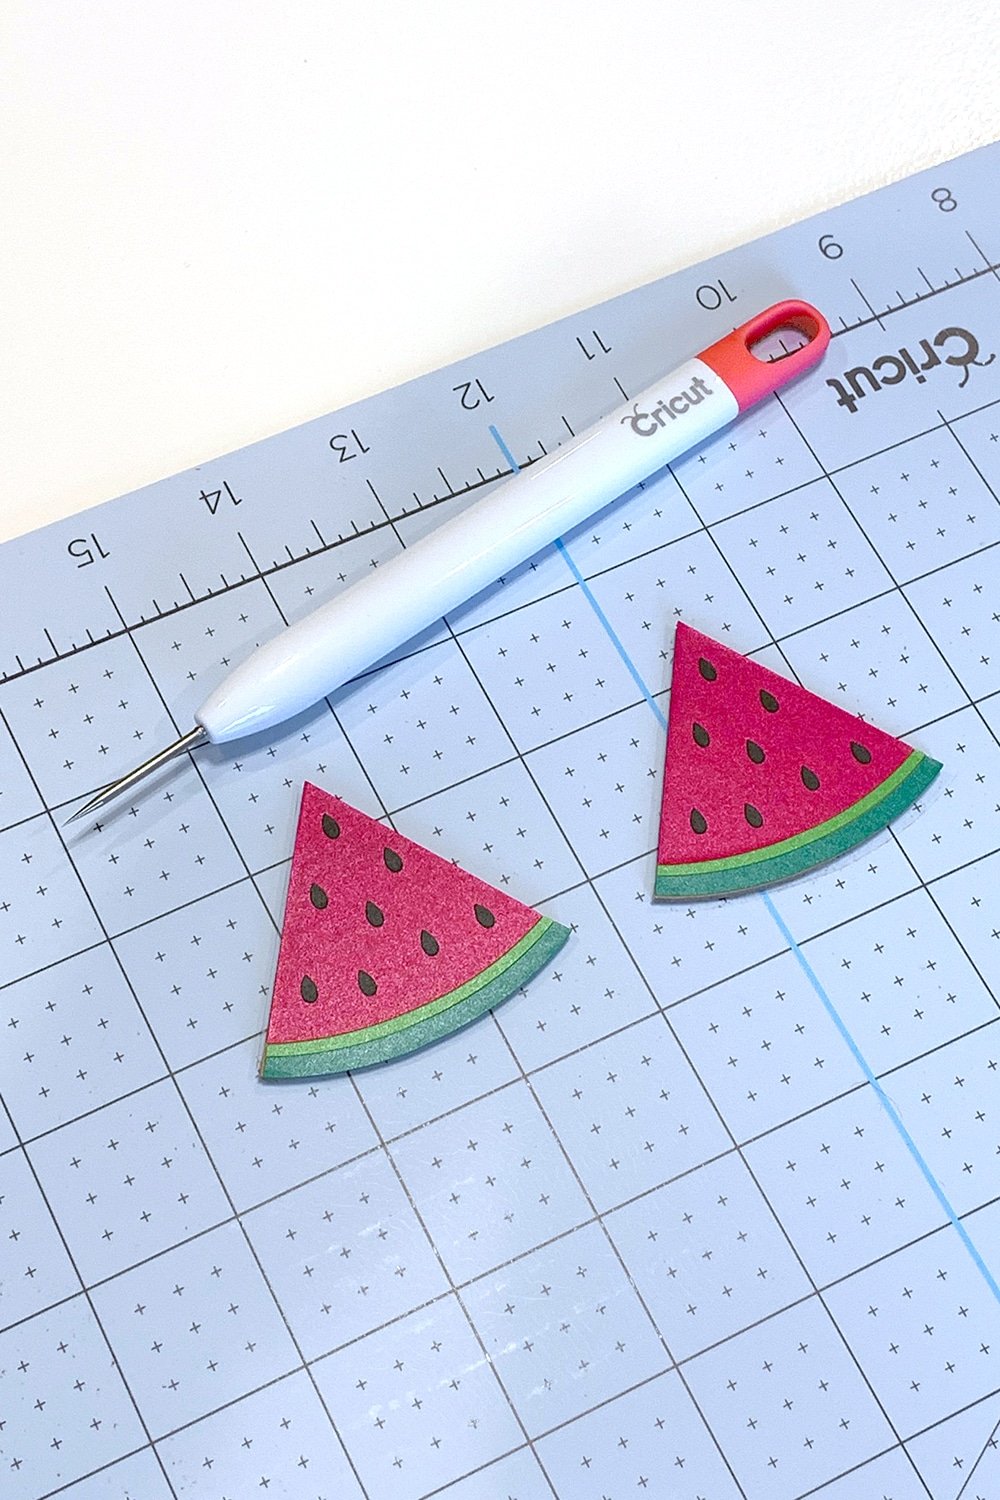 cricut craft tools on cutting mat with watermelon slice earrings